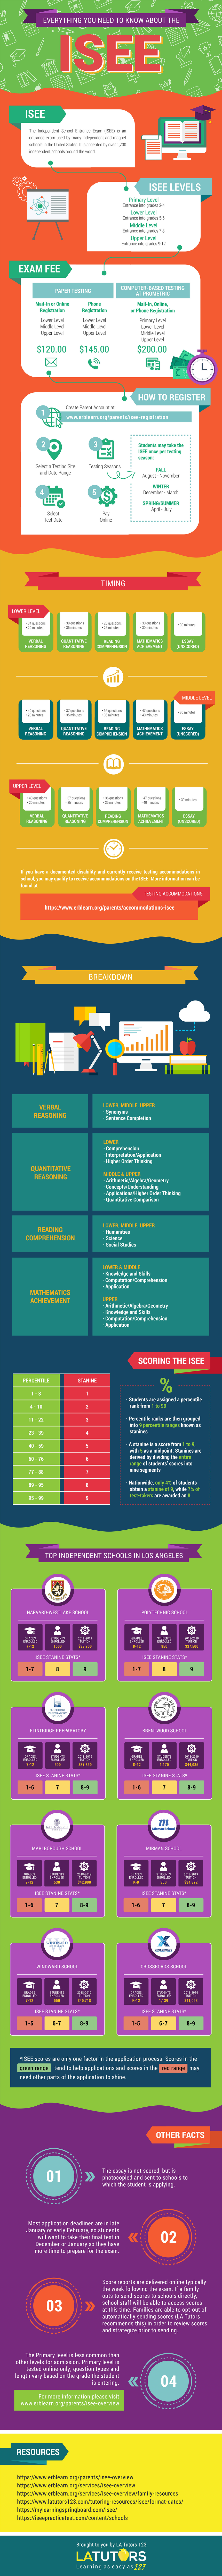 ISEE Infographic